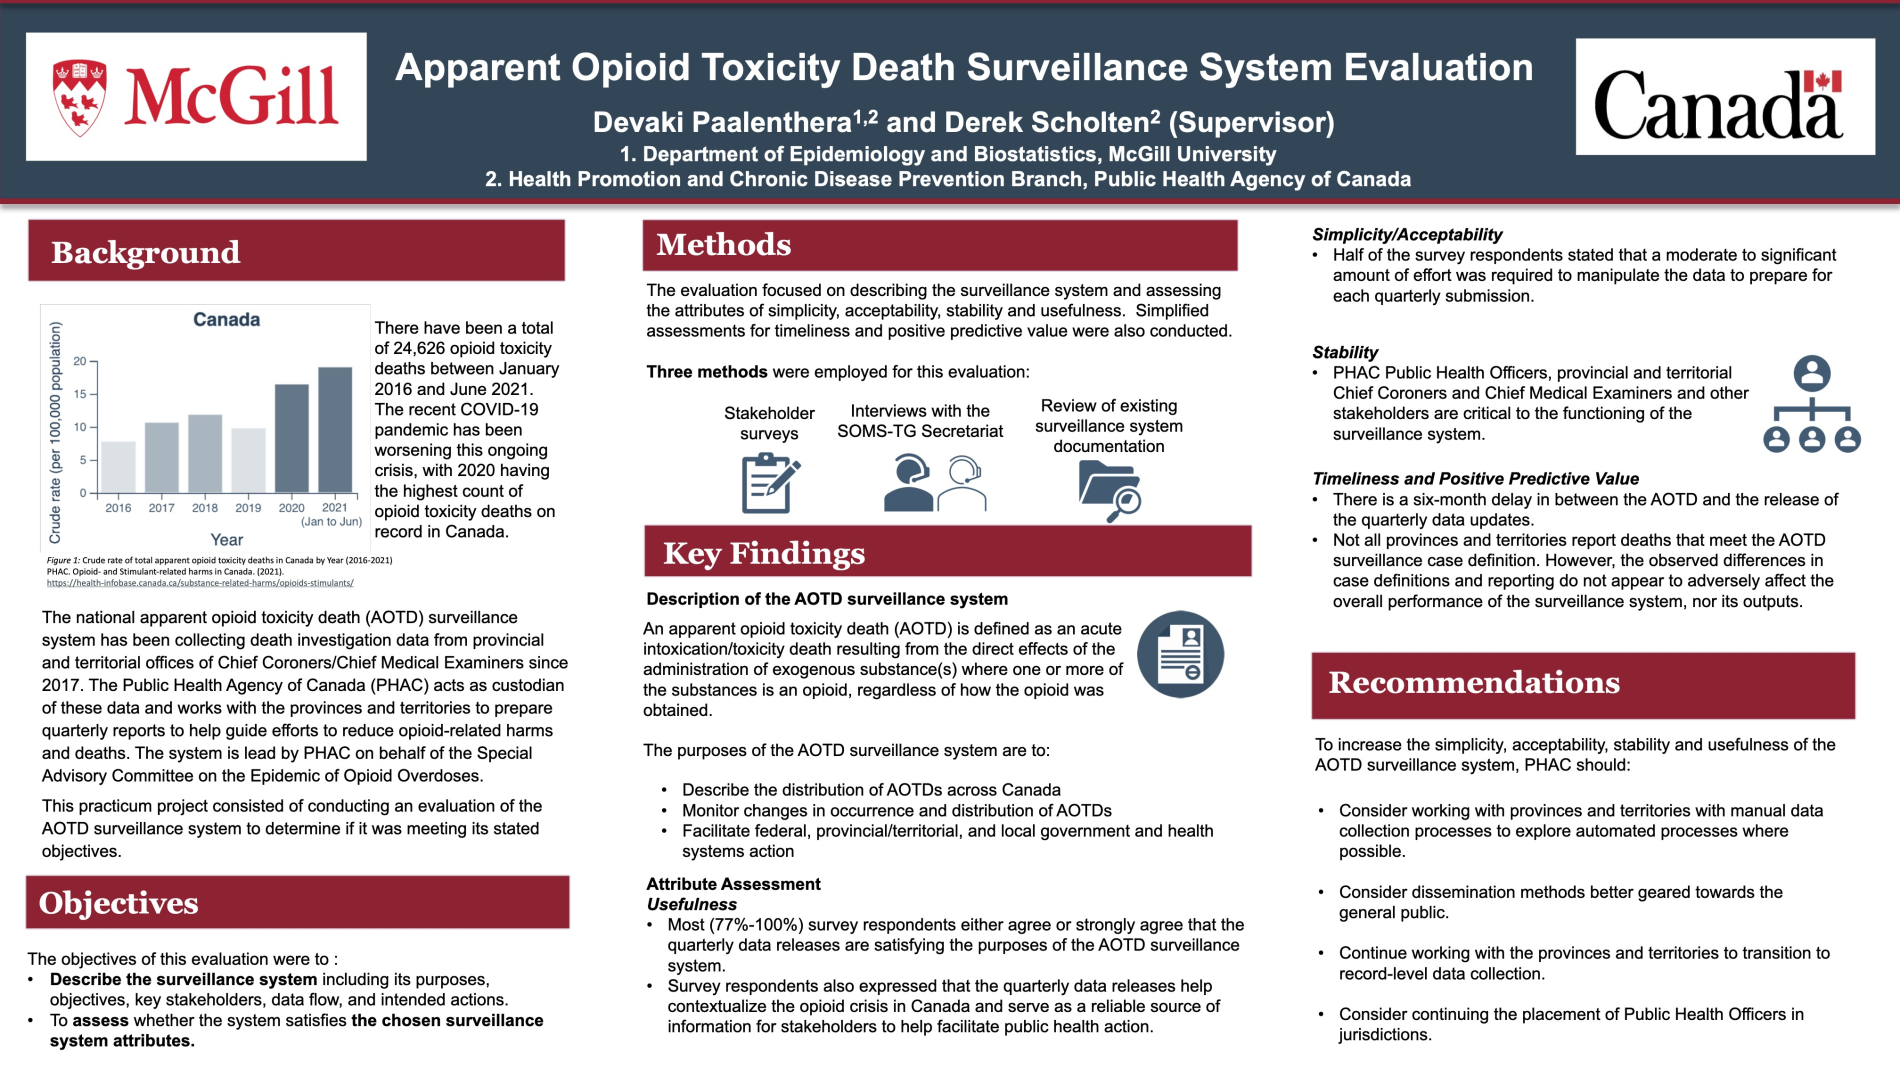 Evaluation of the Apparent Opioid Toxicity Death Surveillance System |  Epidemiology, Biostatistics and Occupational Health - McGill University